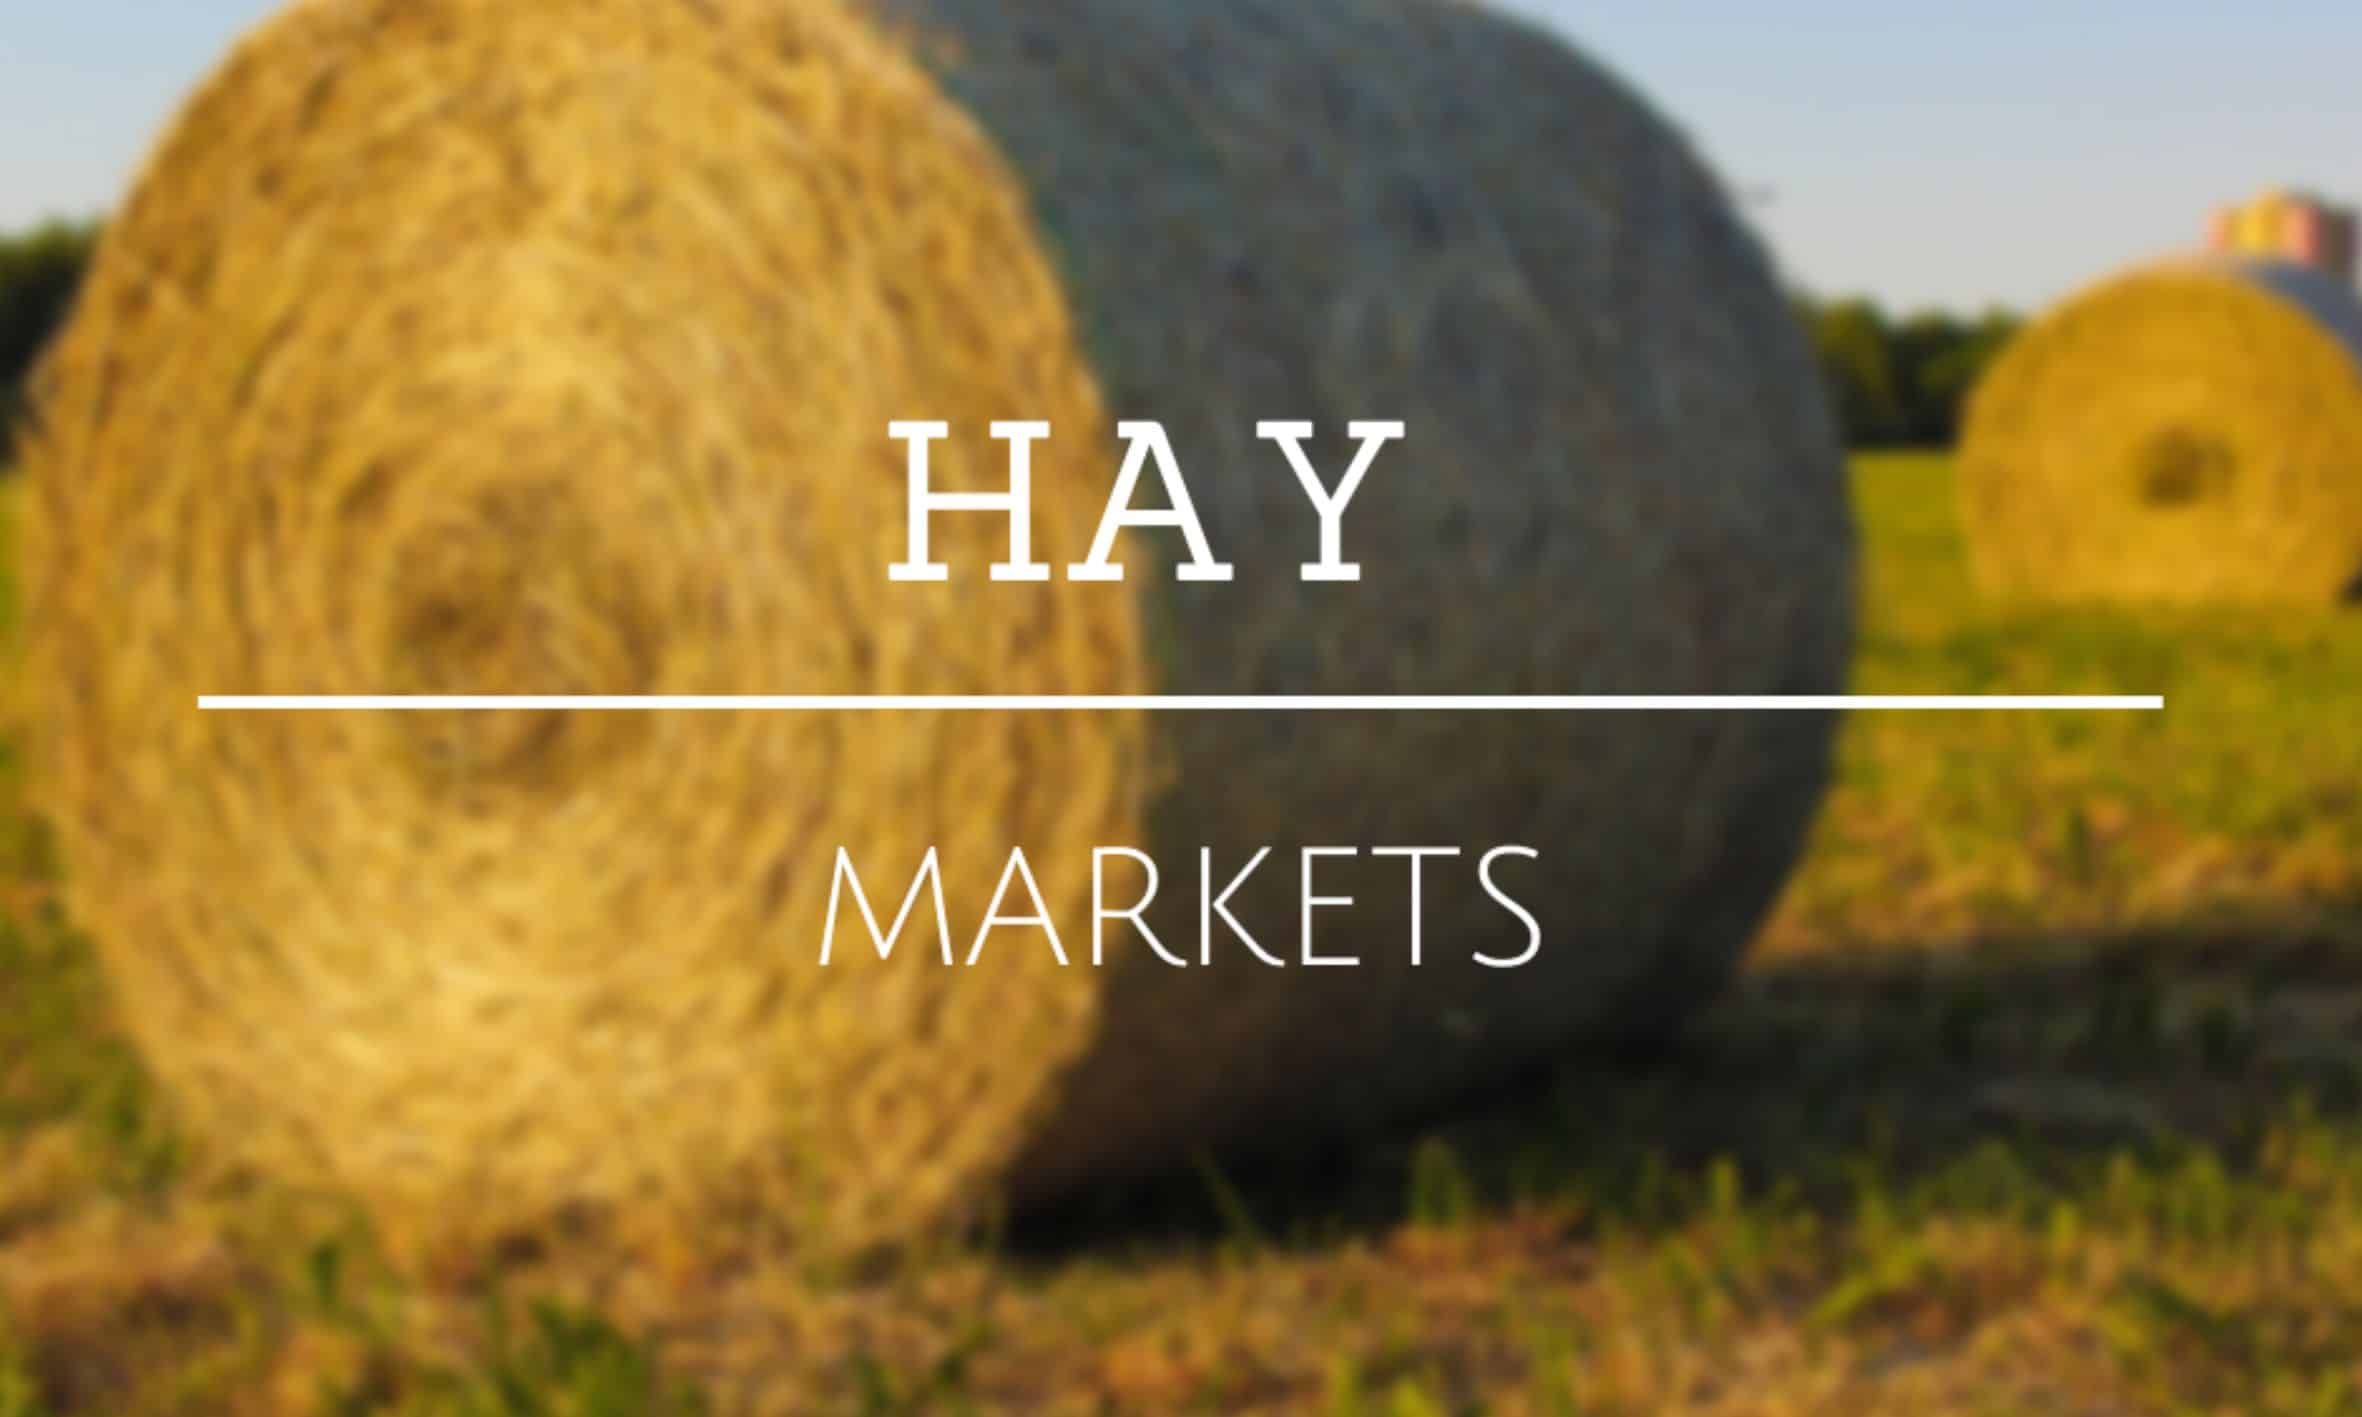 Hay demand has slowed some